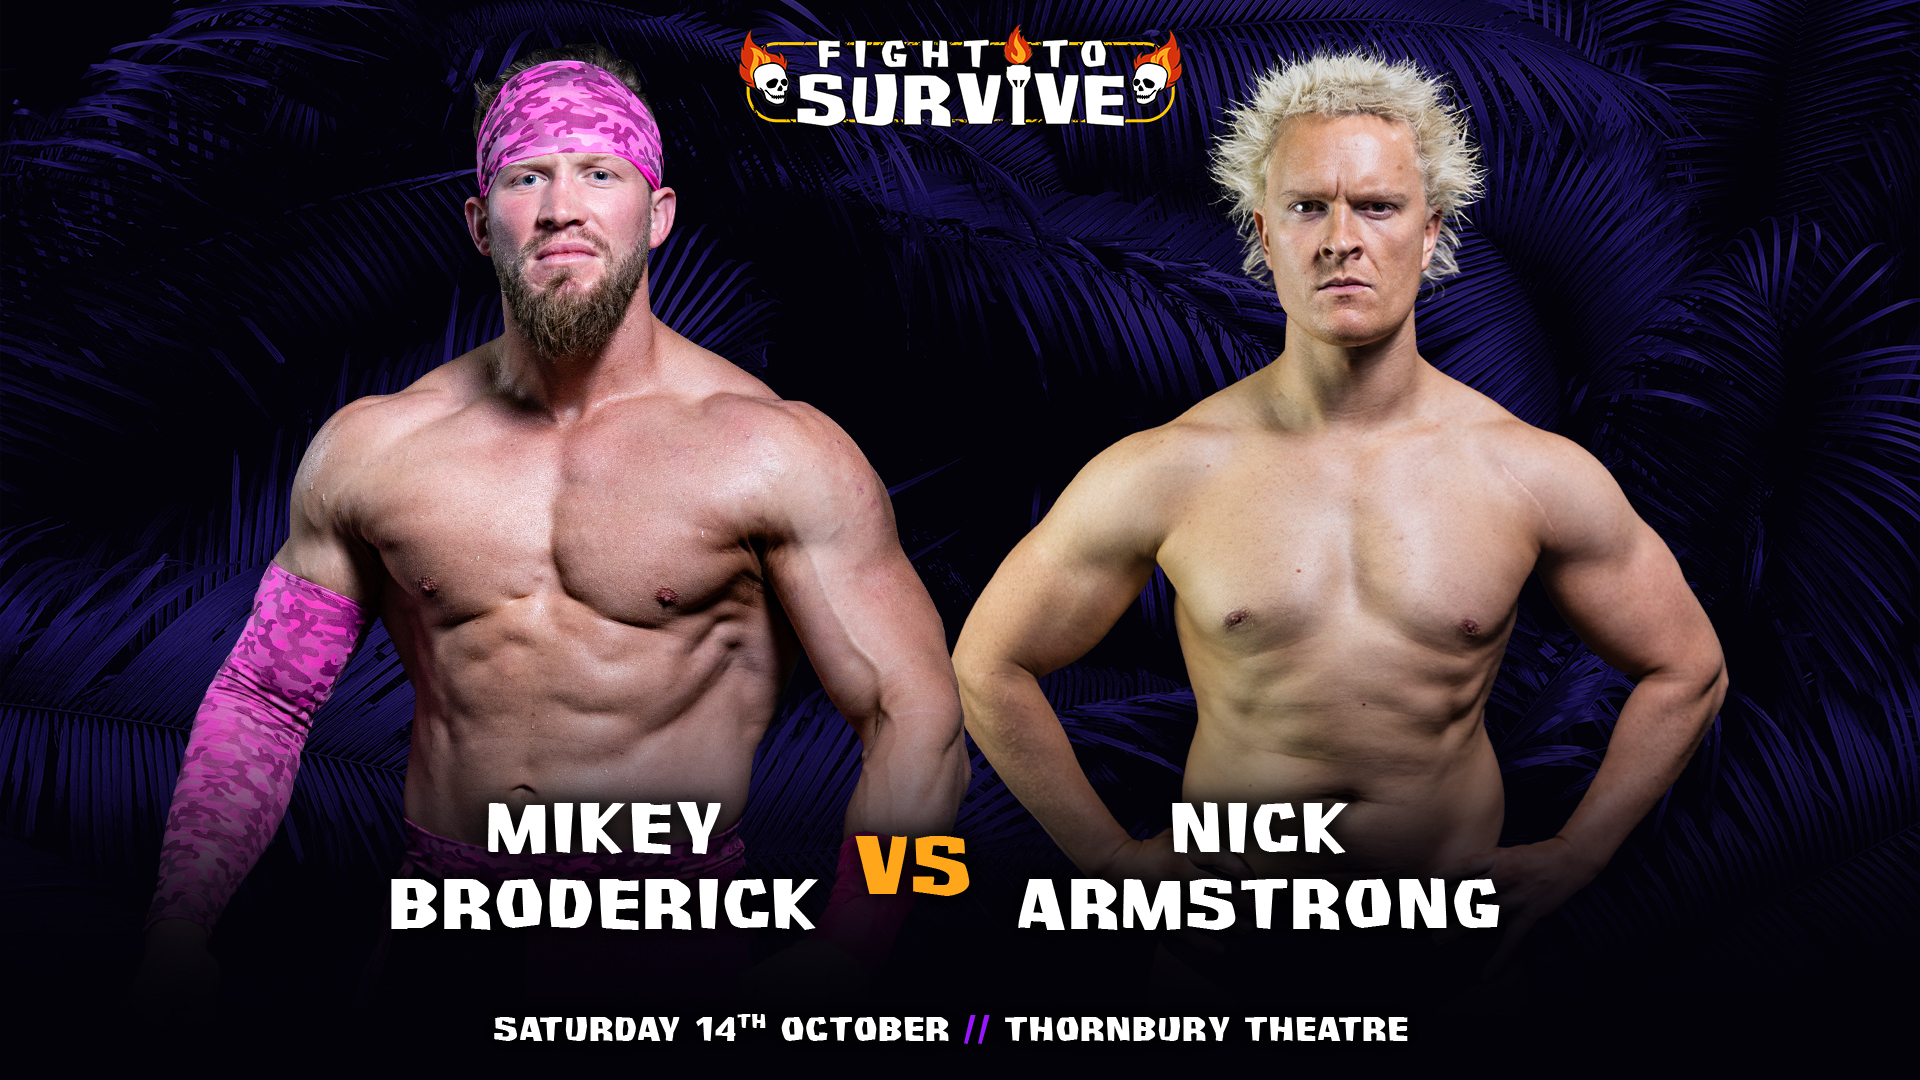 Fight to Survive – Mikey Broderick vs. Nick Armstrong